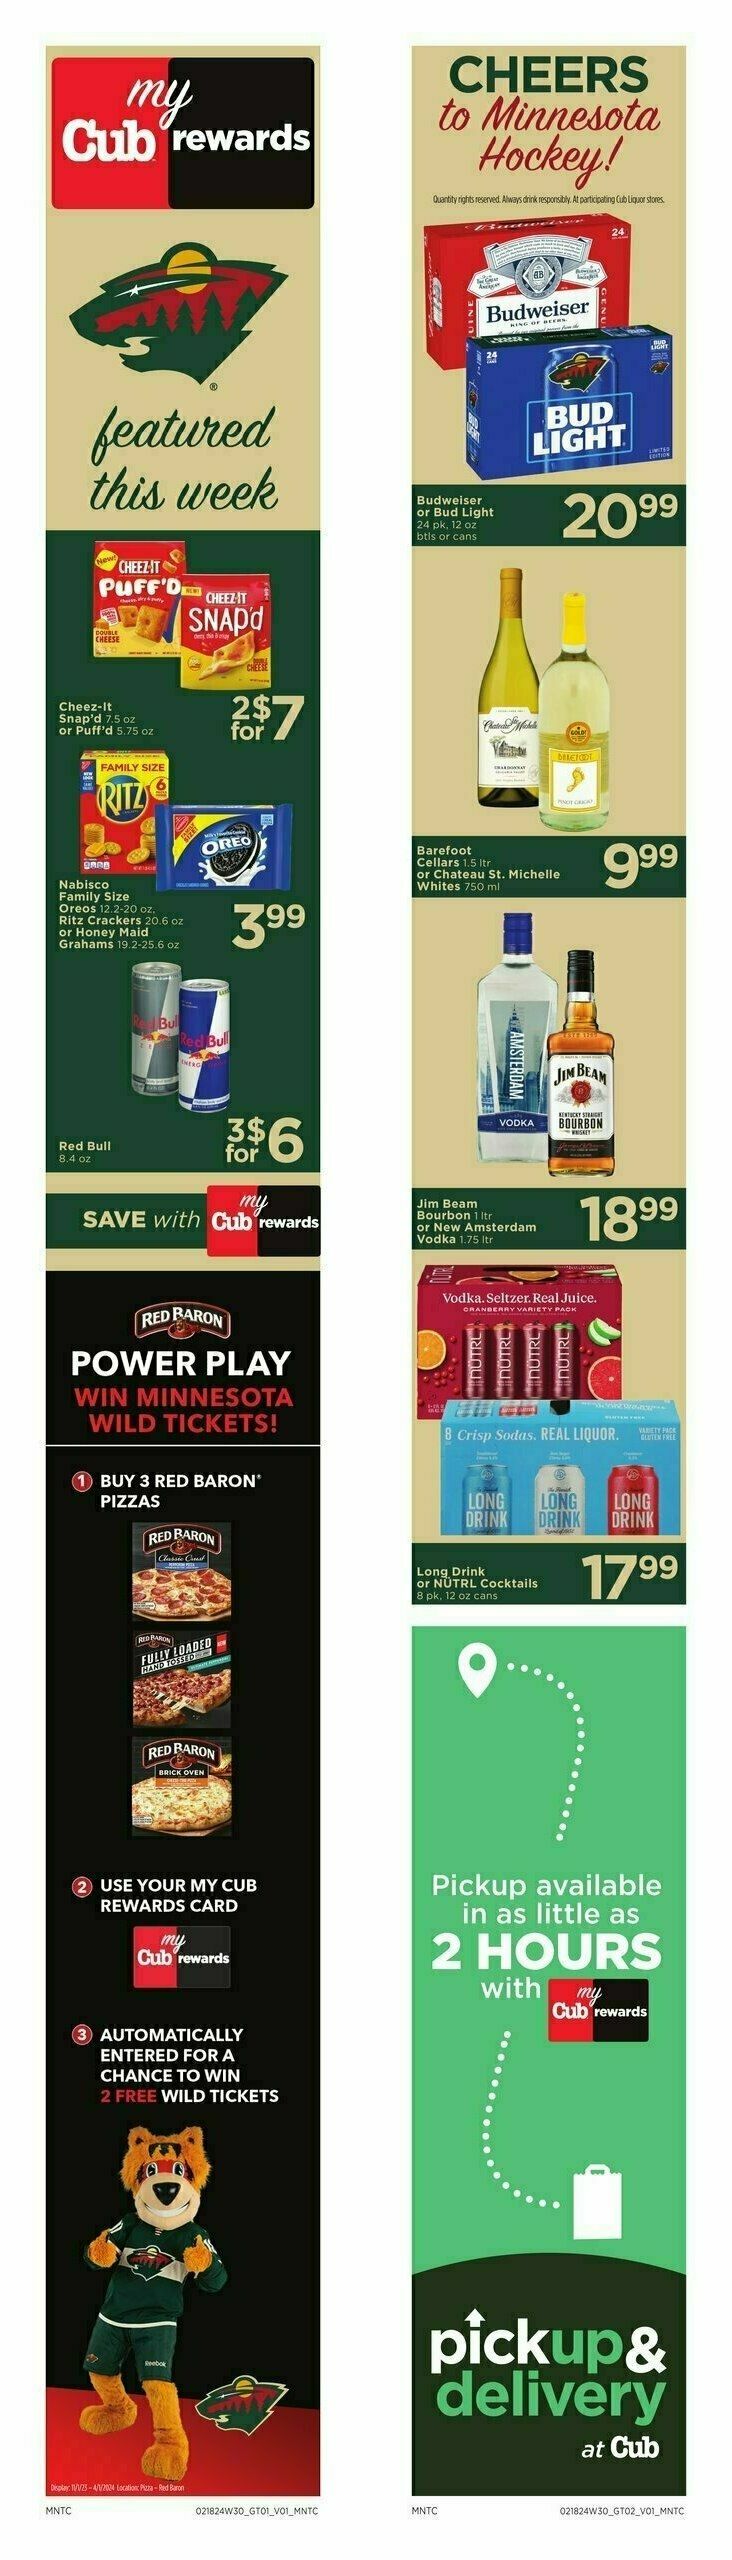 Cub Foods Weekly Ad from February 18